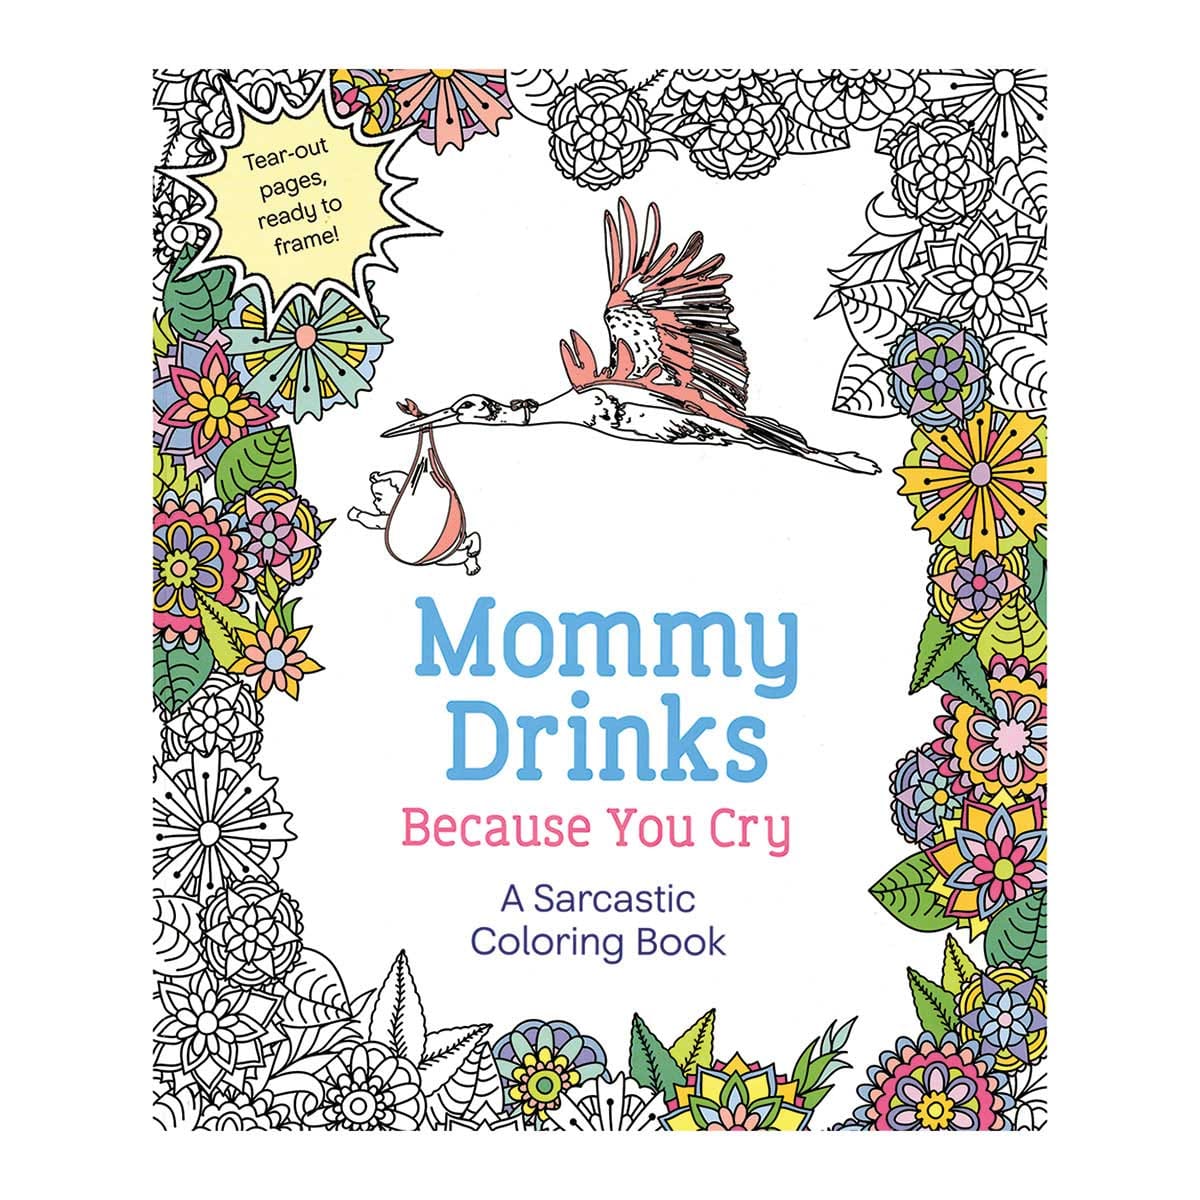 Mommy Drinks Because You Cry Coloring Book by St. Martin's Griffin - rolik